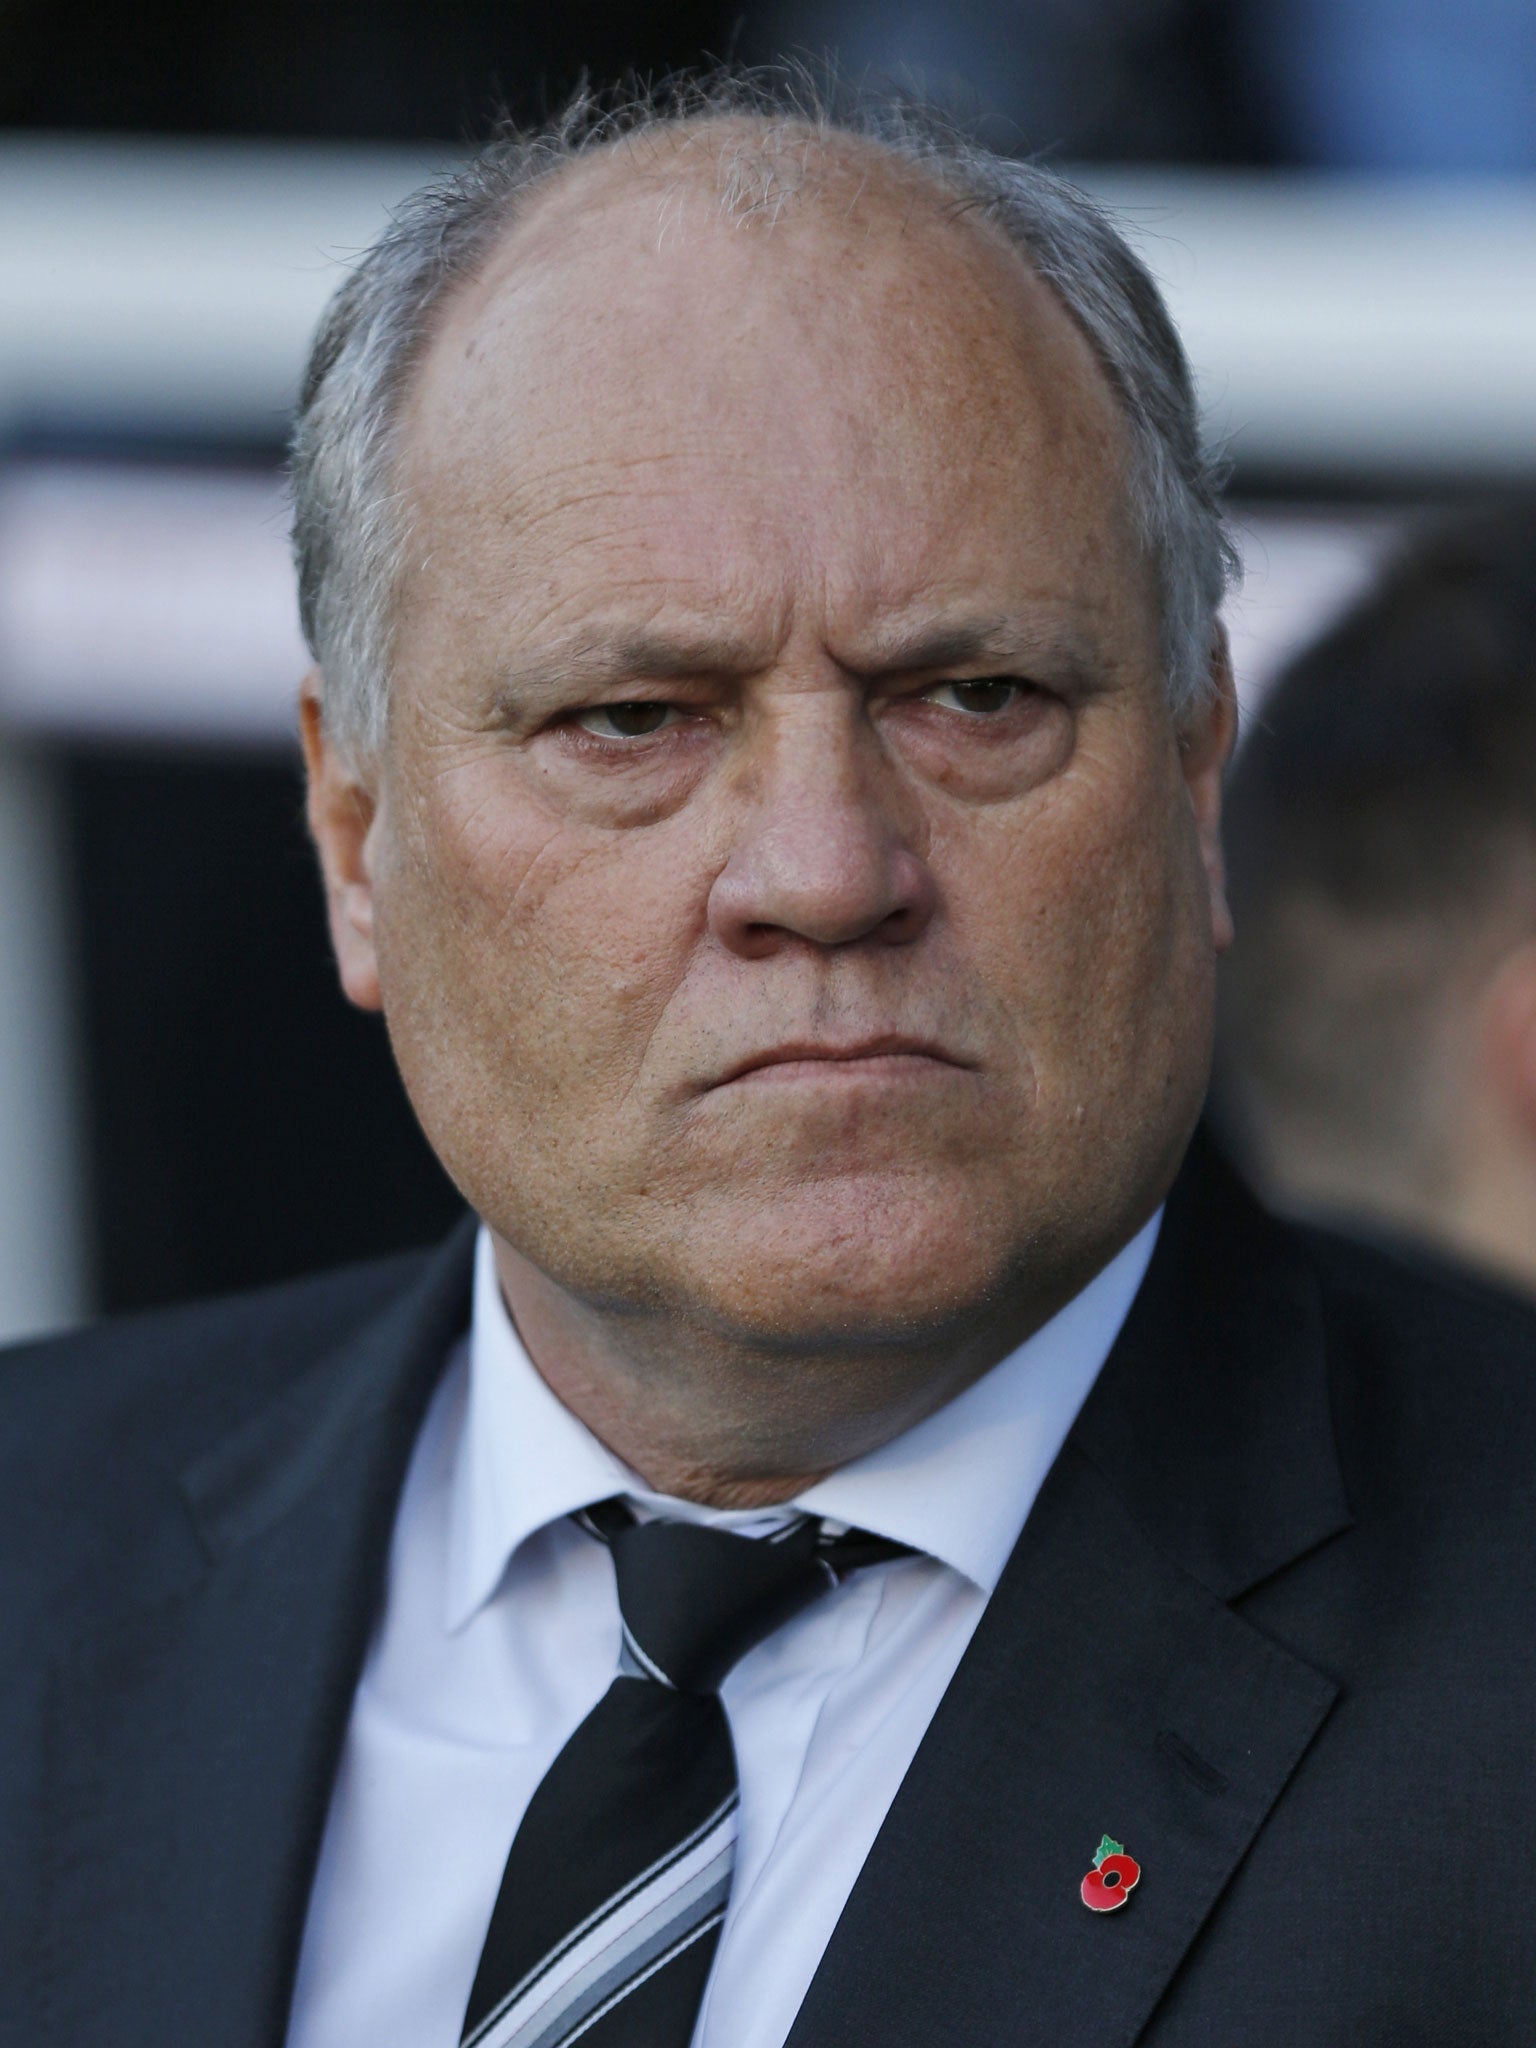 Martin Jol admits he is perplexed by Fulham’s inconsistent form